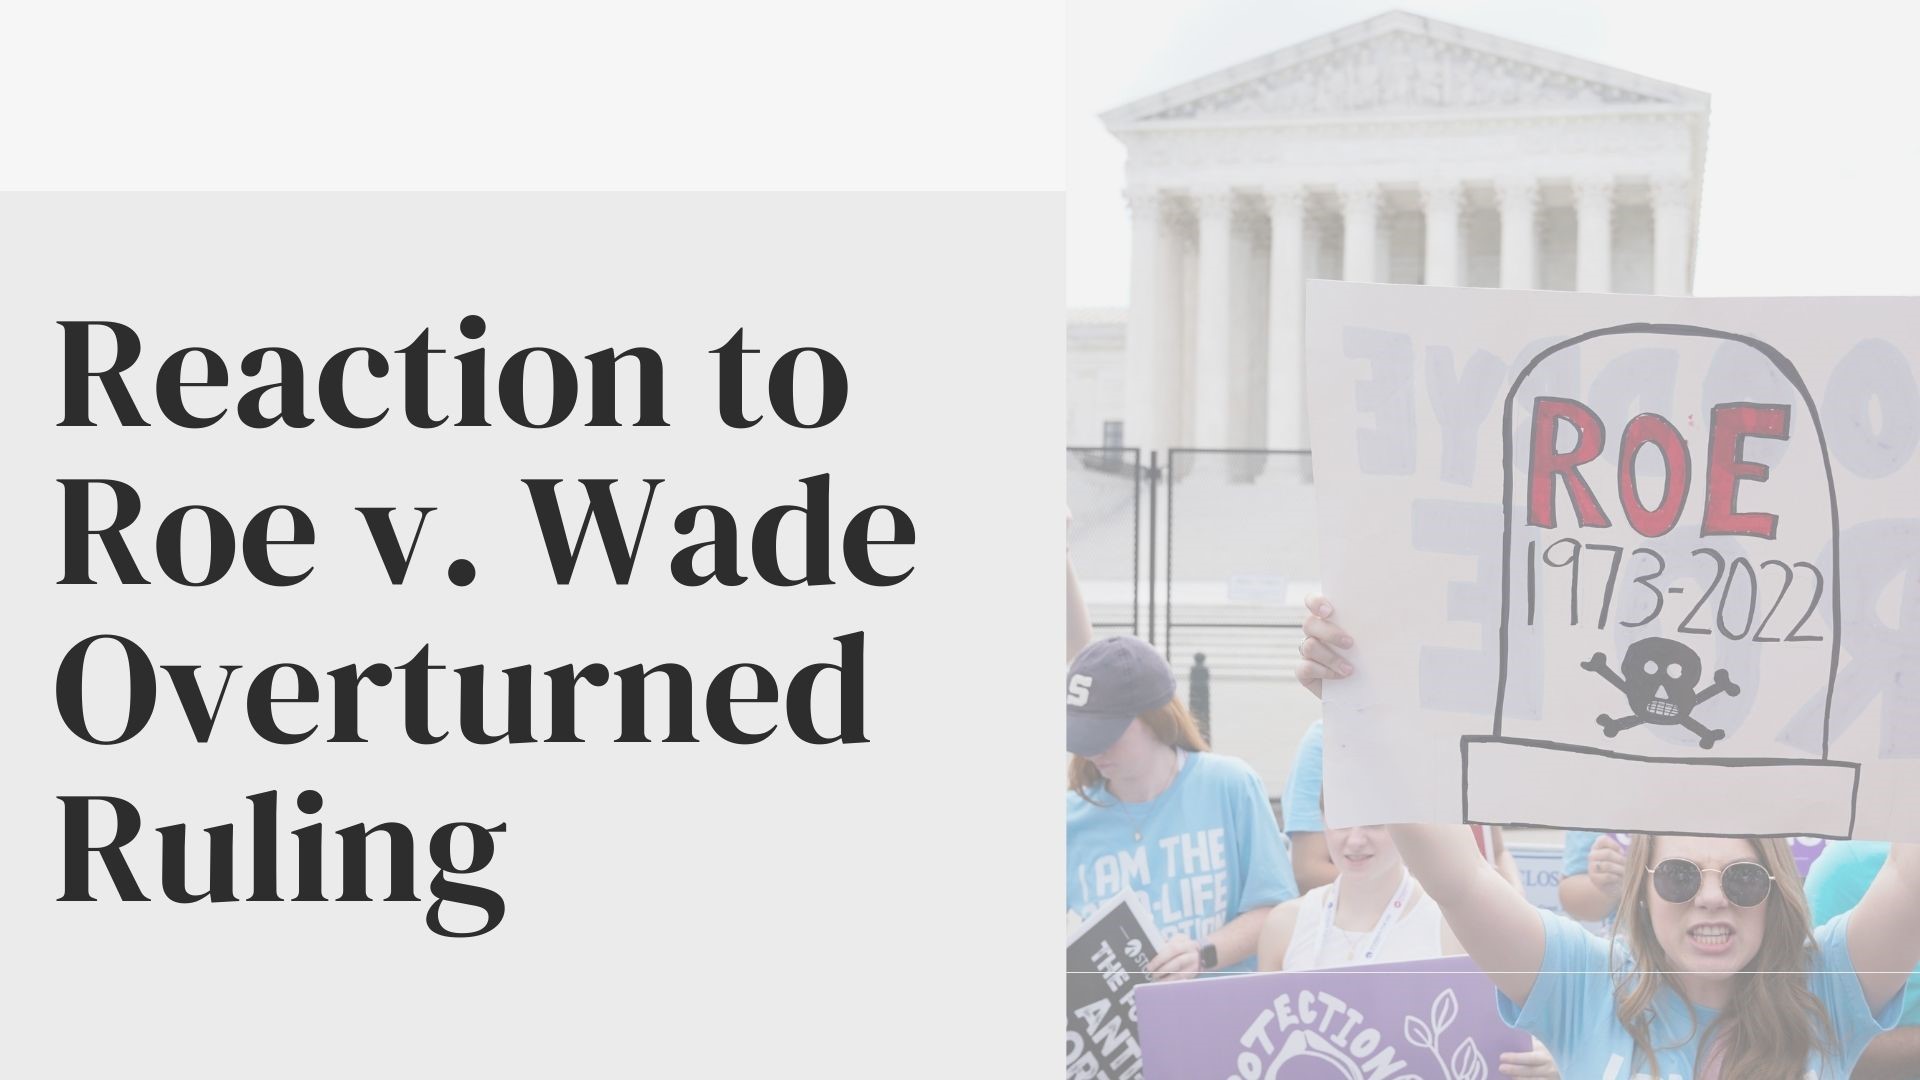 Reactions from all across the U.S. as the Supreme Court overturned the Roe v. Wade decision, getting rid of the constitutional right to an abortion.